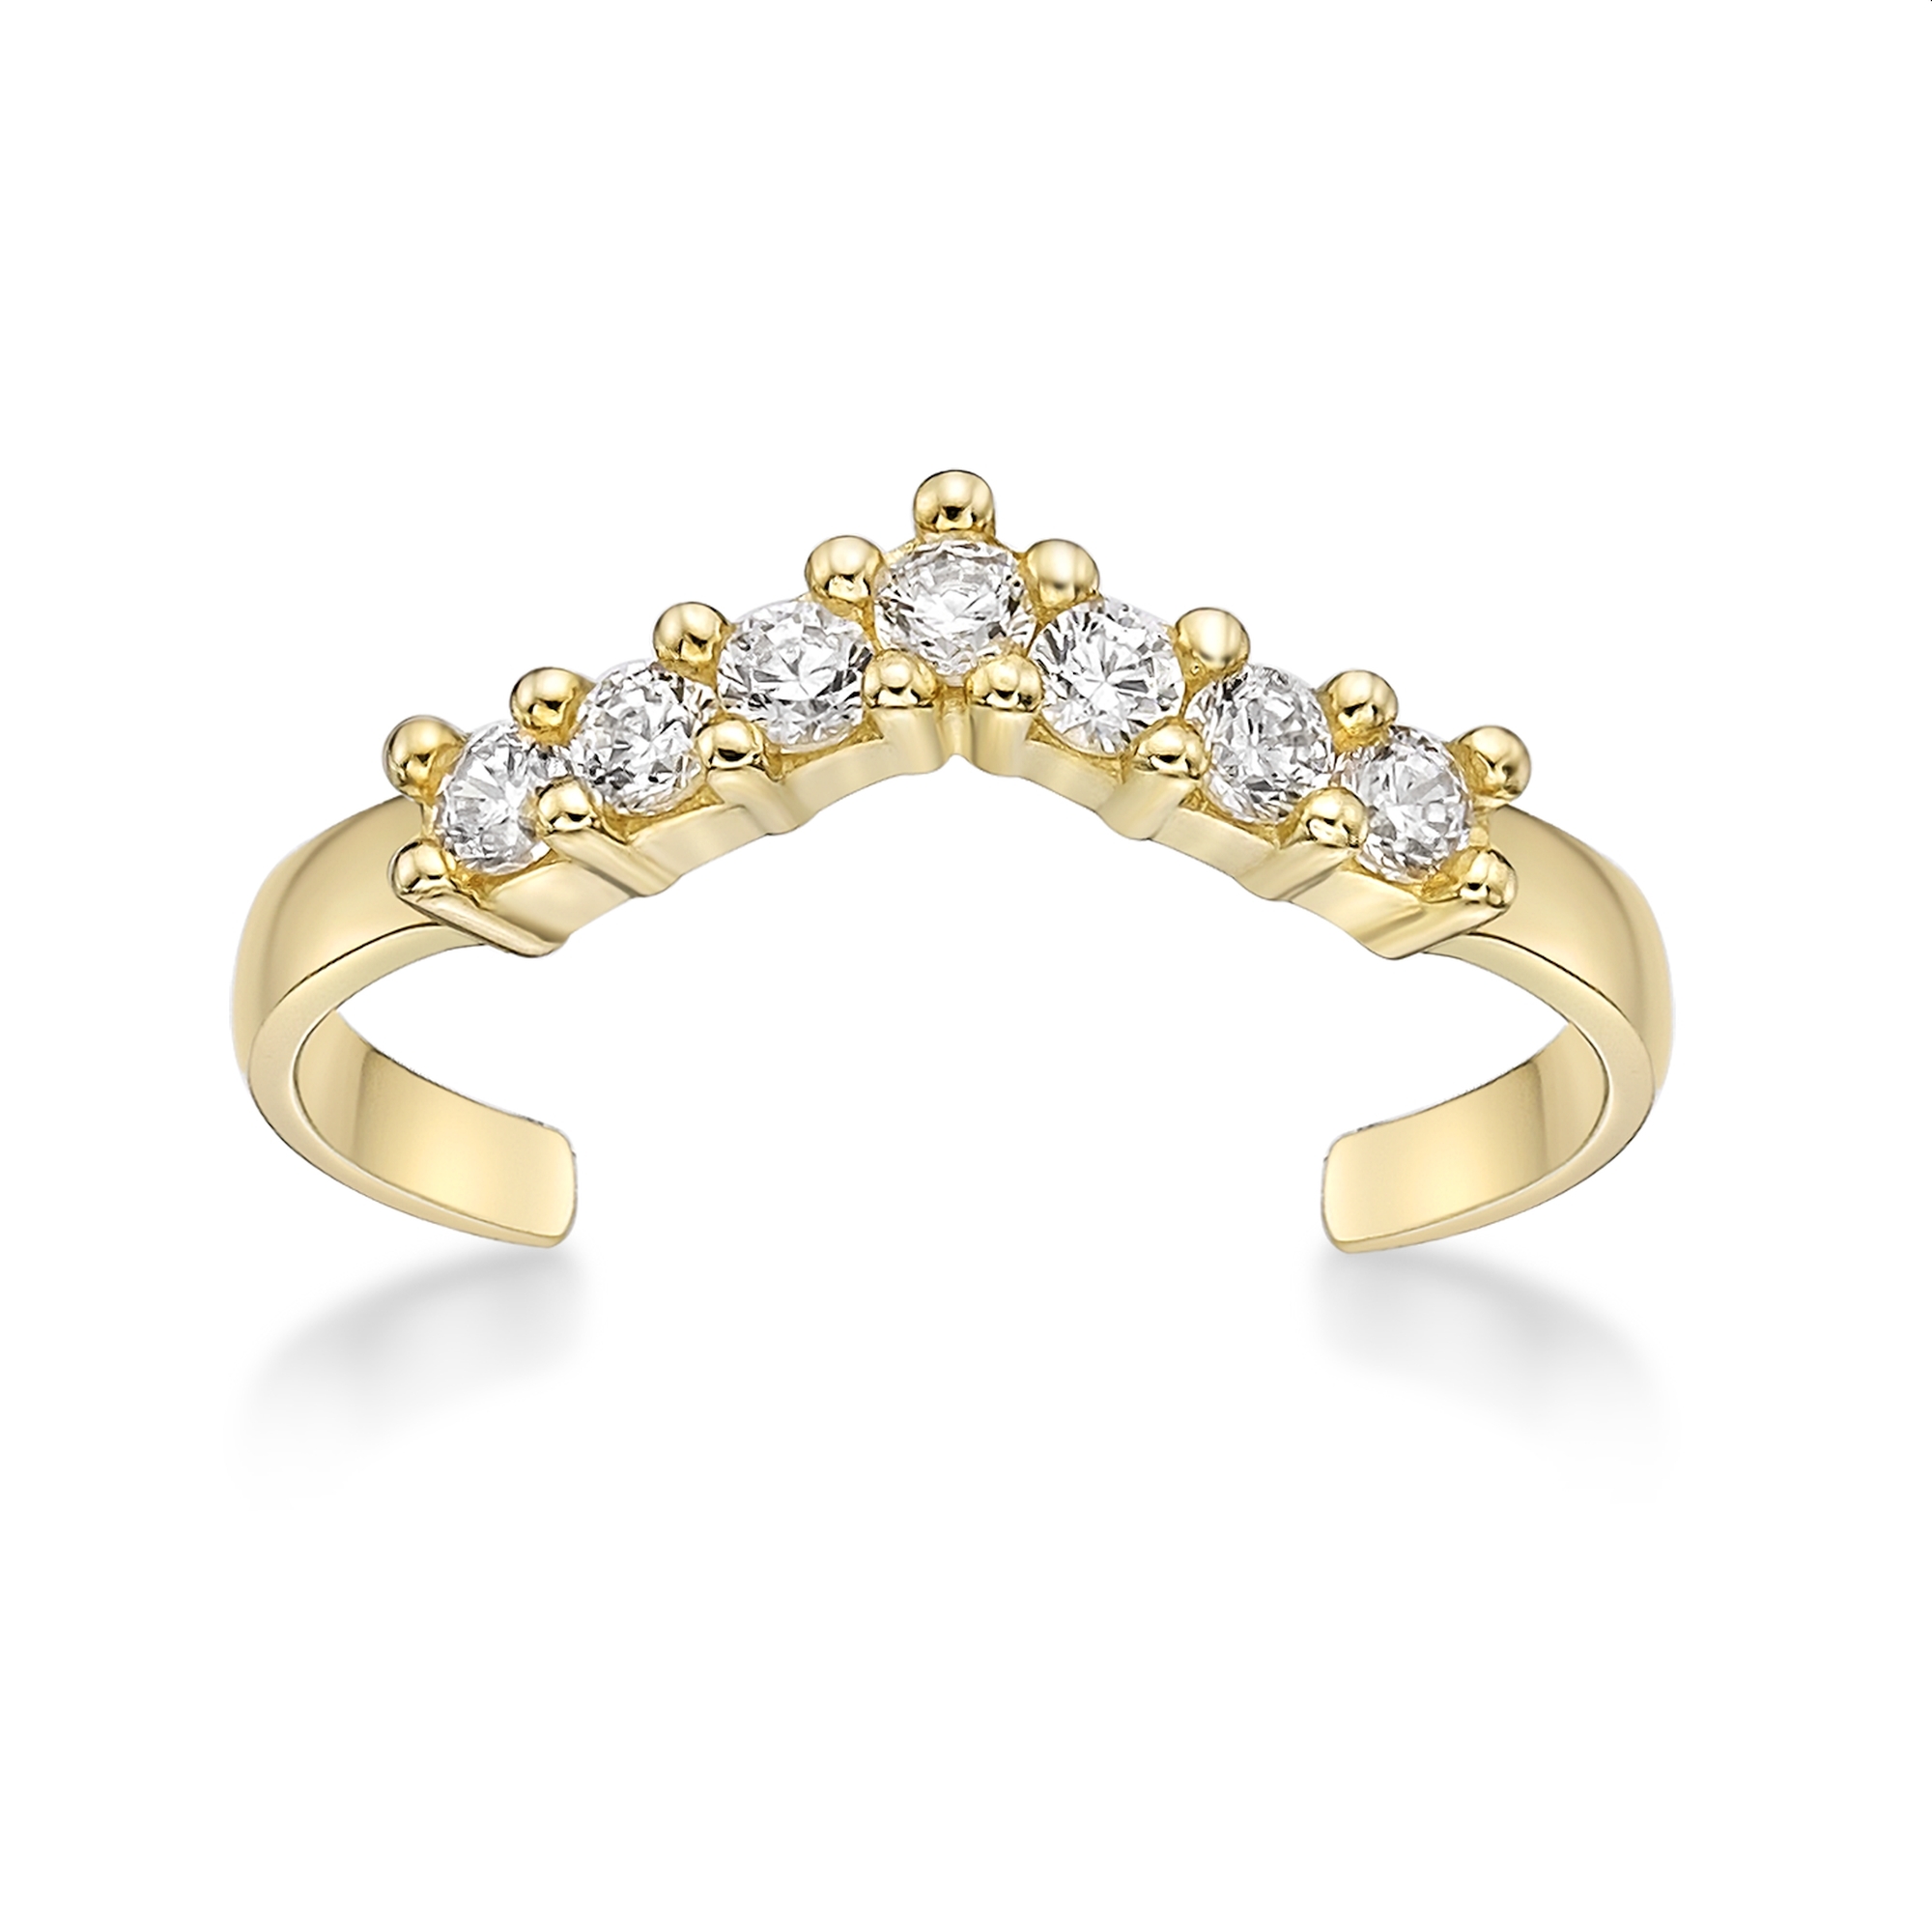 50935-toe-ring-default-collection-yellow-gold-cz-rd-1-70mm-50935.jpg